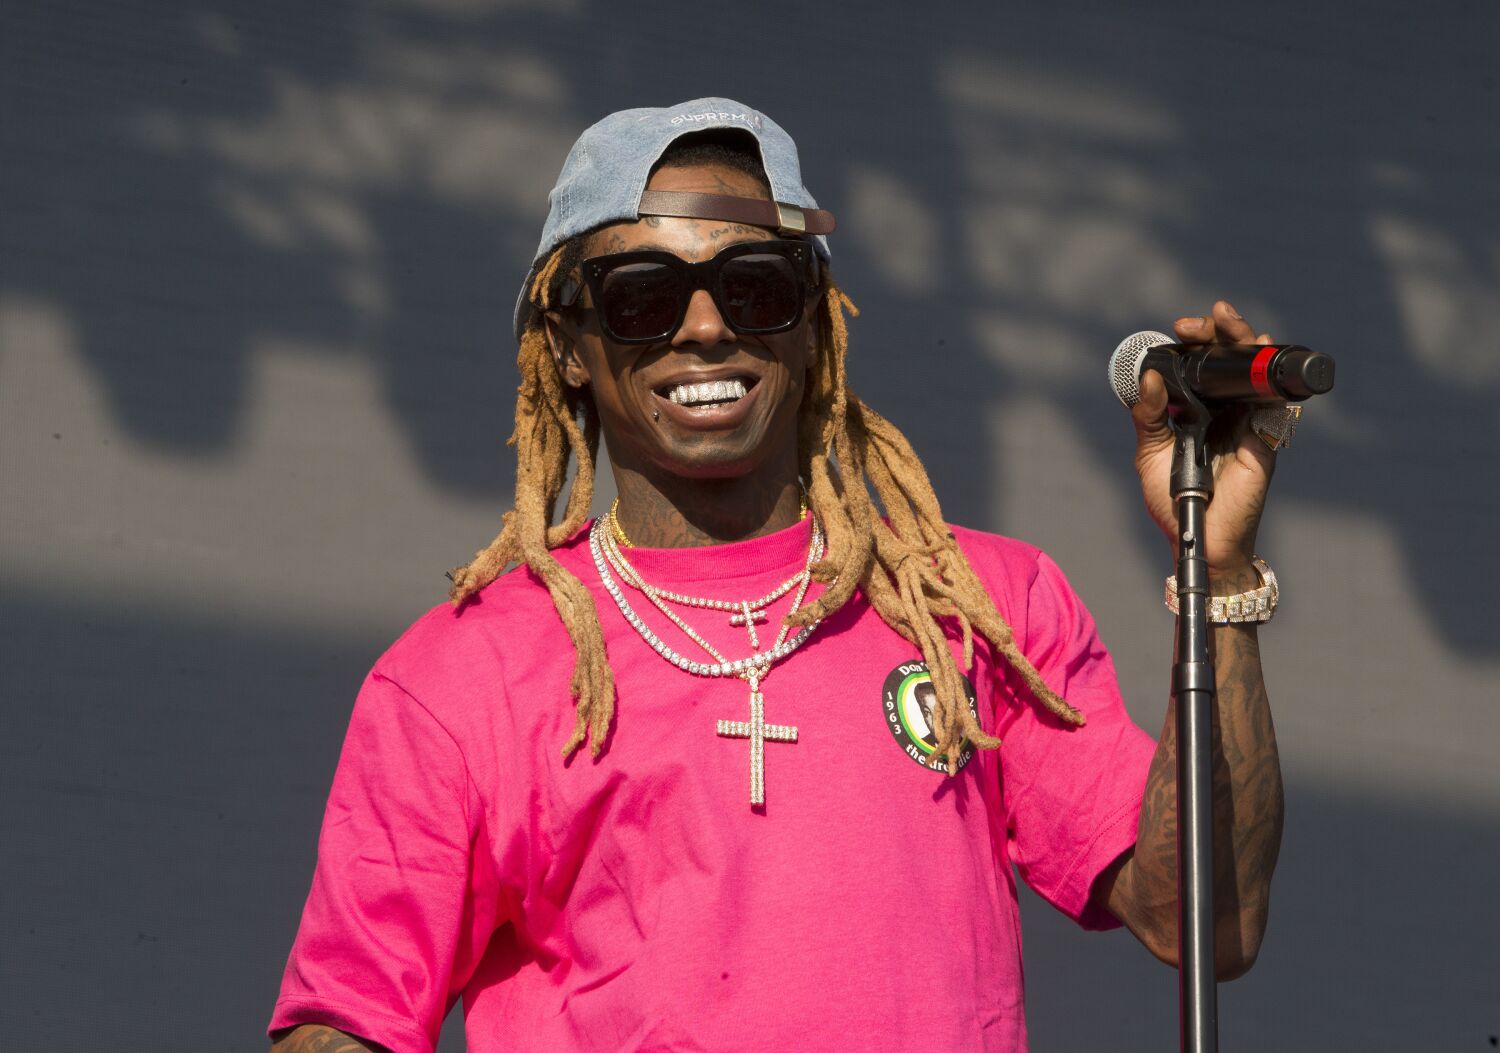 Lil Wayne says he doesn't remember 'Tha Carter III'